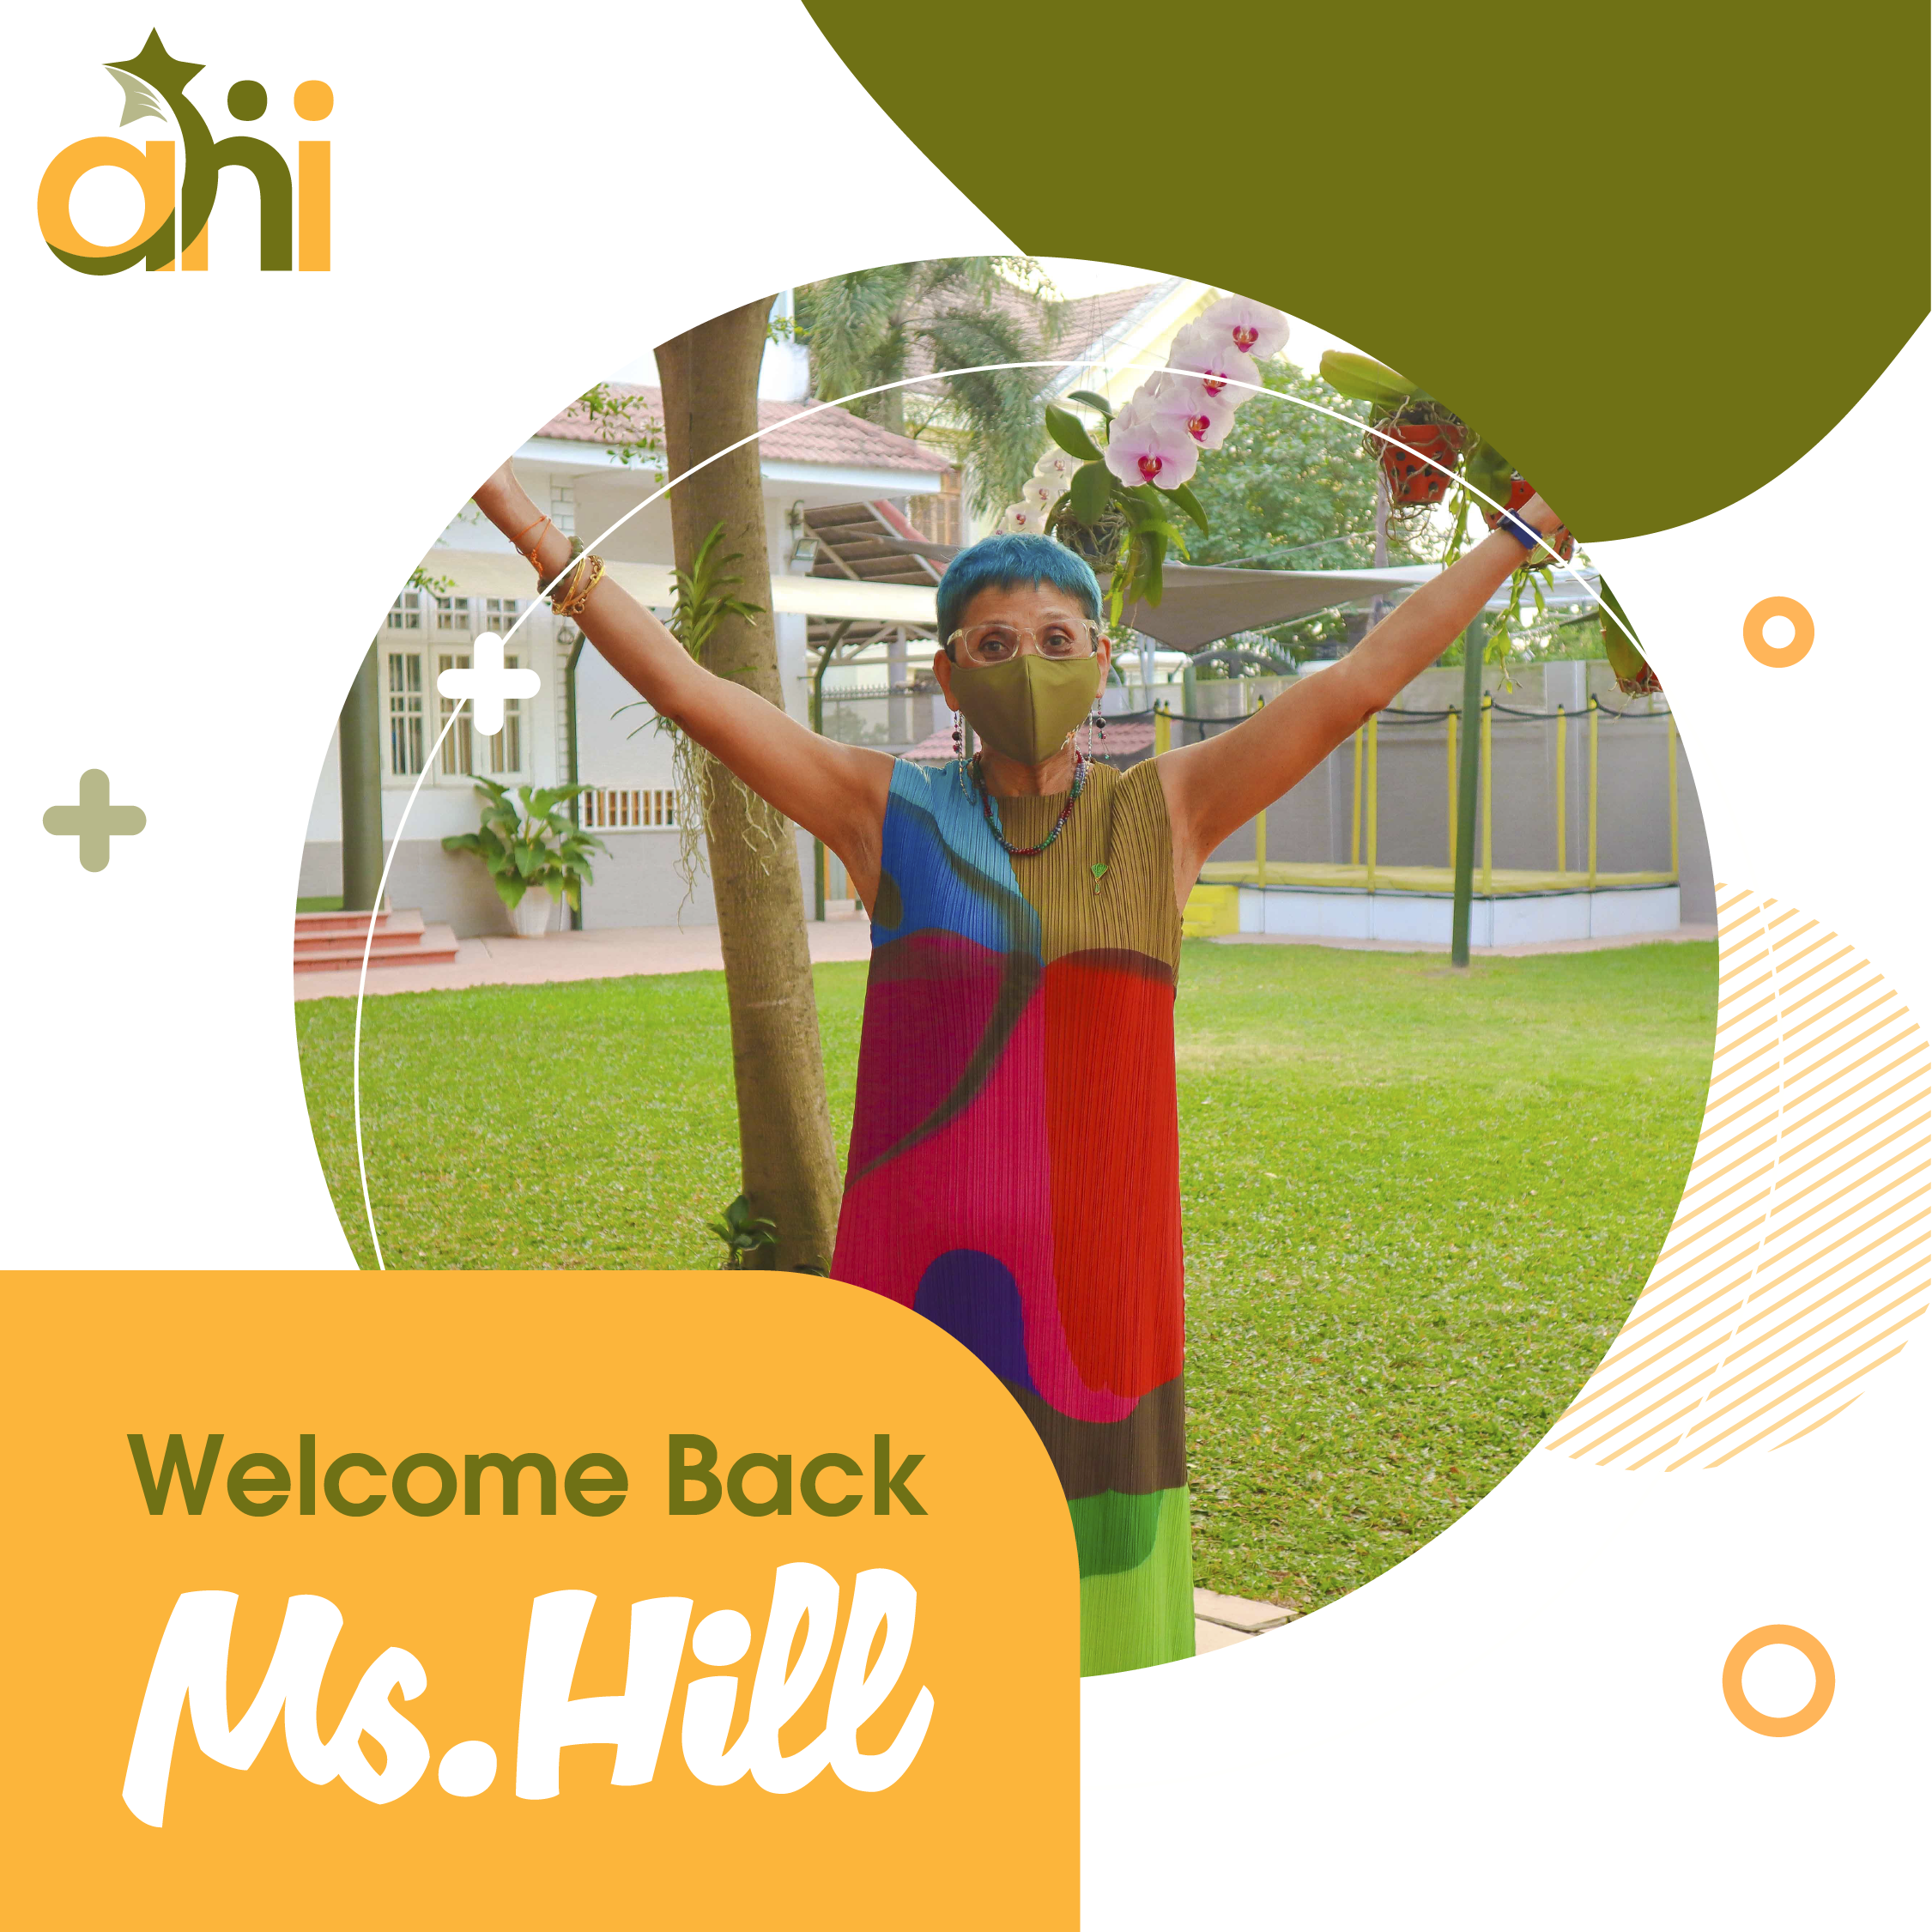 Welcome Back Ms.Hill!